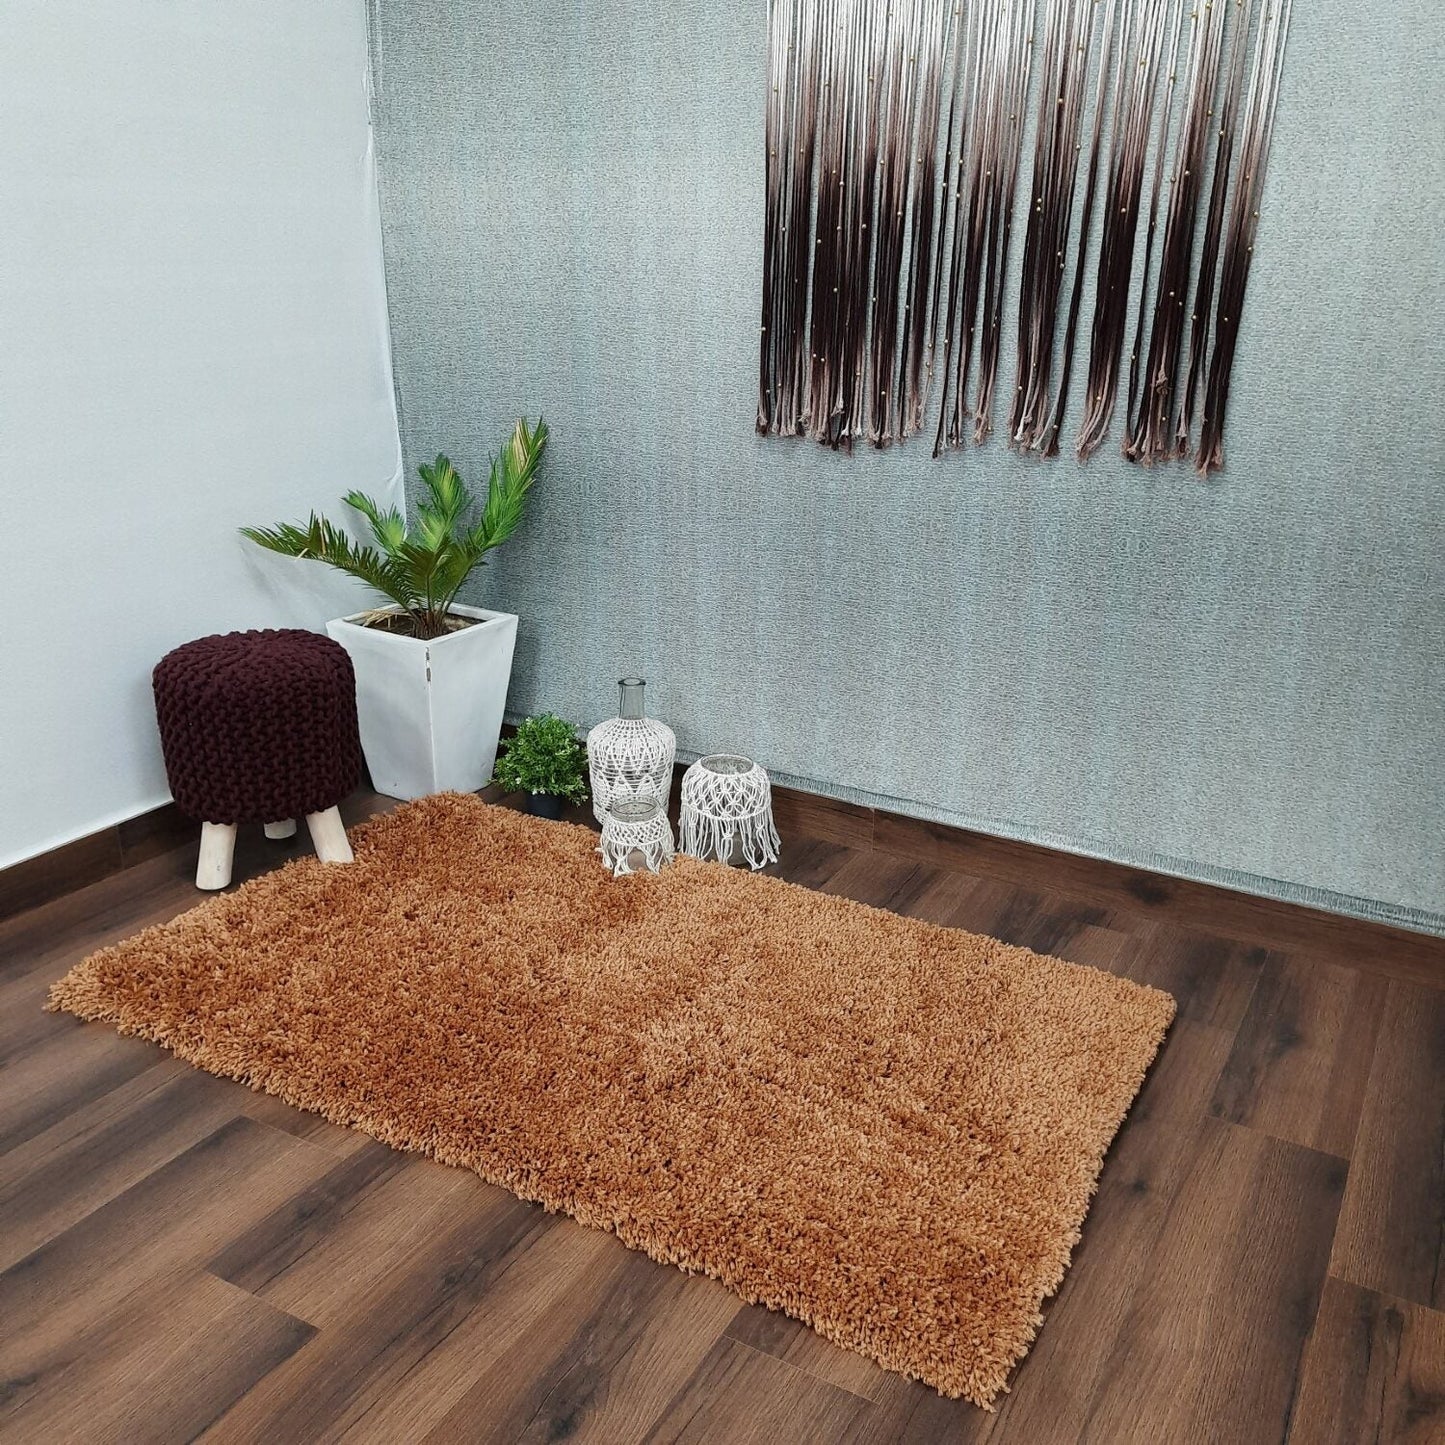 Shaggy Carpet | Washable | Hand Woven Super Luxurious Feel | Export Quality- Camel/Brown Color